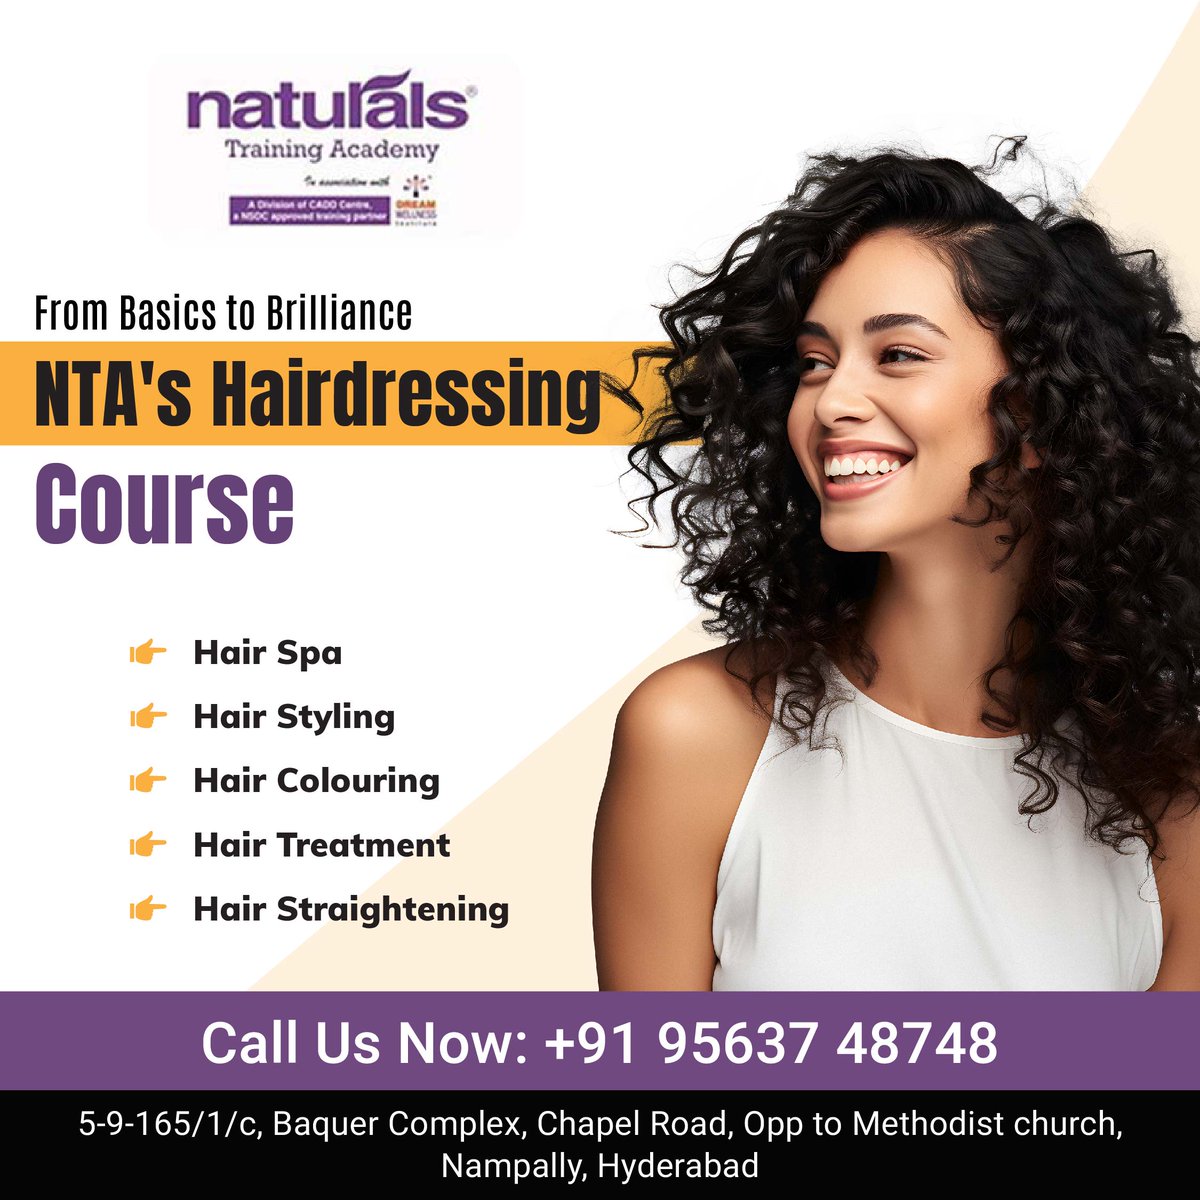 Unleash your inner hair magician with NTA's Hairdressing Course! This immersive program takes you from hair care fundamentals to crafting show-stopping styles. Contact Us: 95637 48748 visit : naturalsacademy.com #haircarejourney #nta #nampally #hyderabad